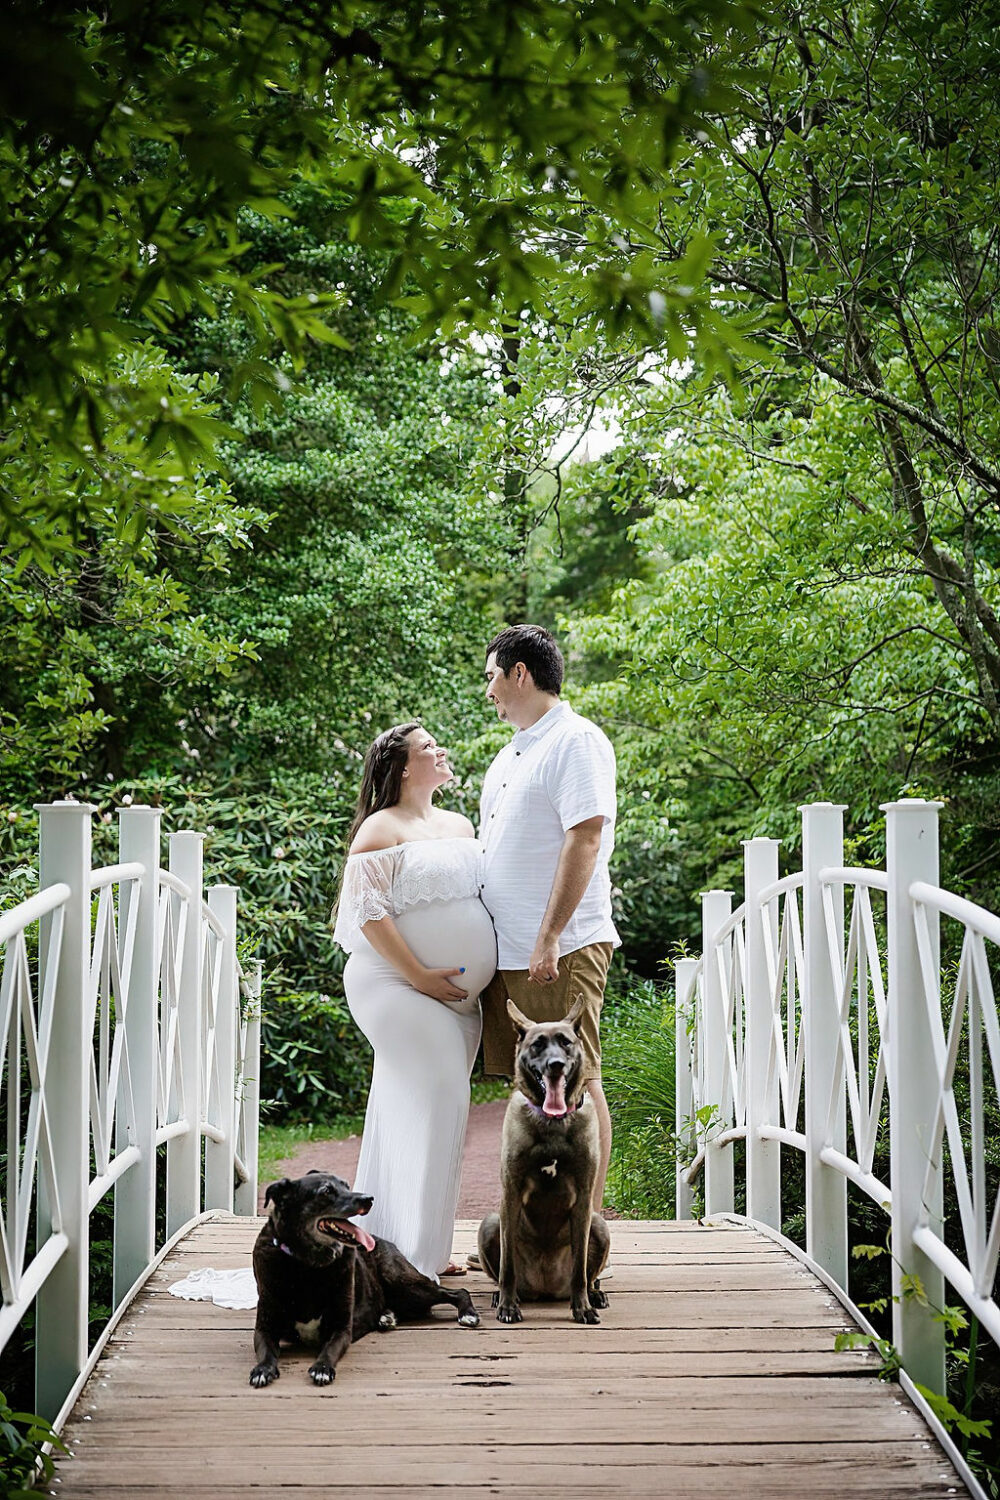 Pregnant woman looking up at her husband posing on bridge with her two dogs for her maternity pictures in Cherry Hill, New Jersey.